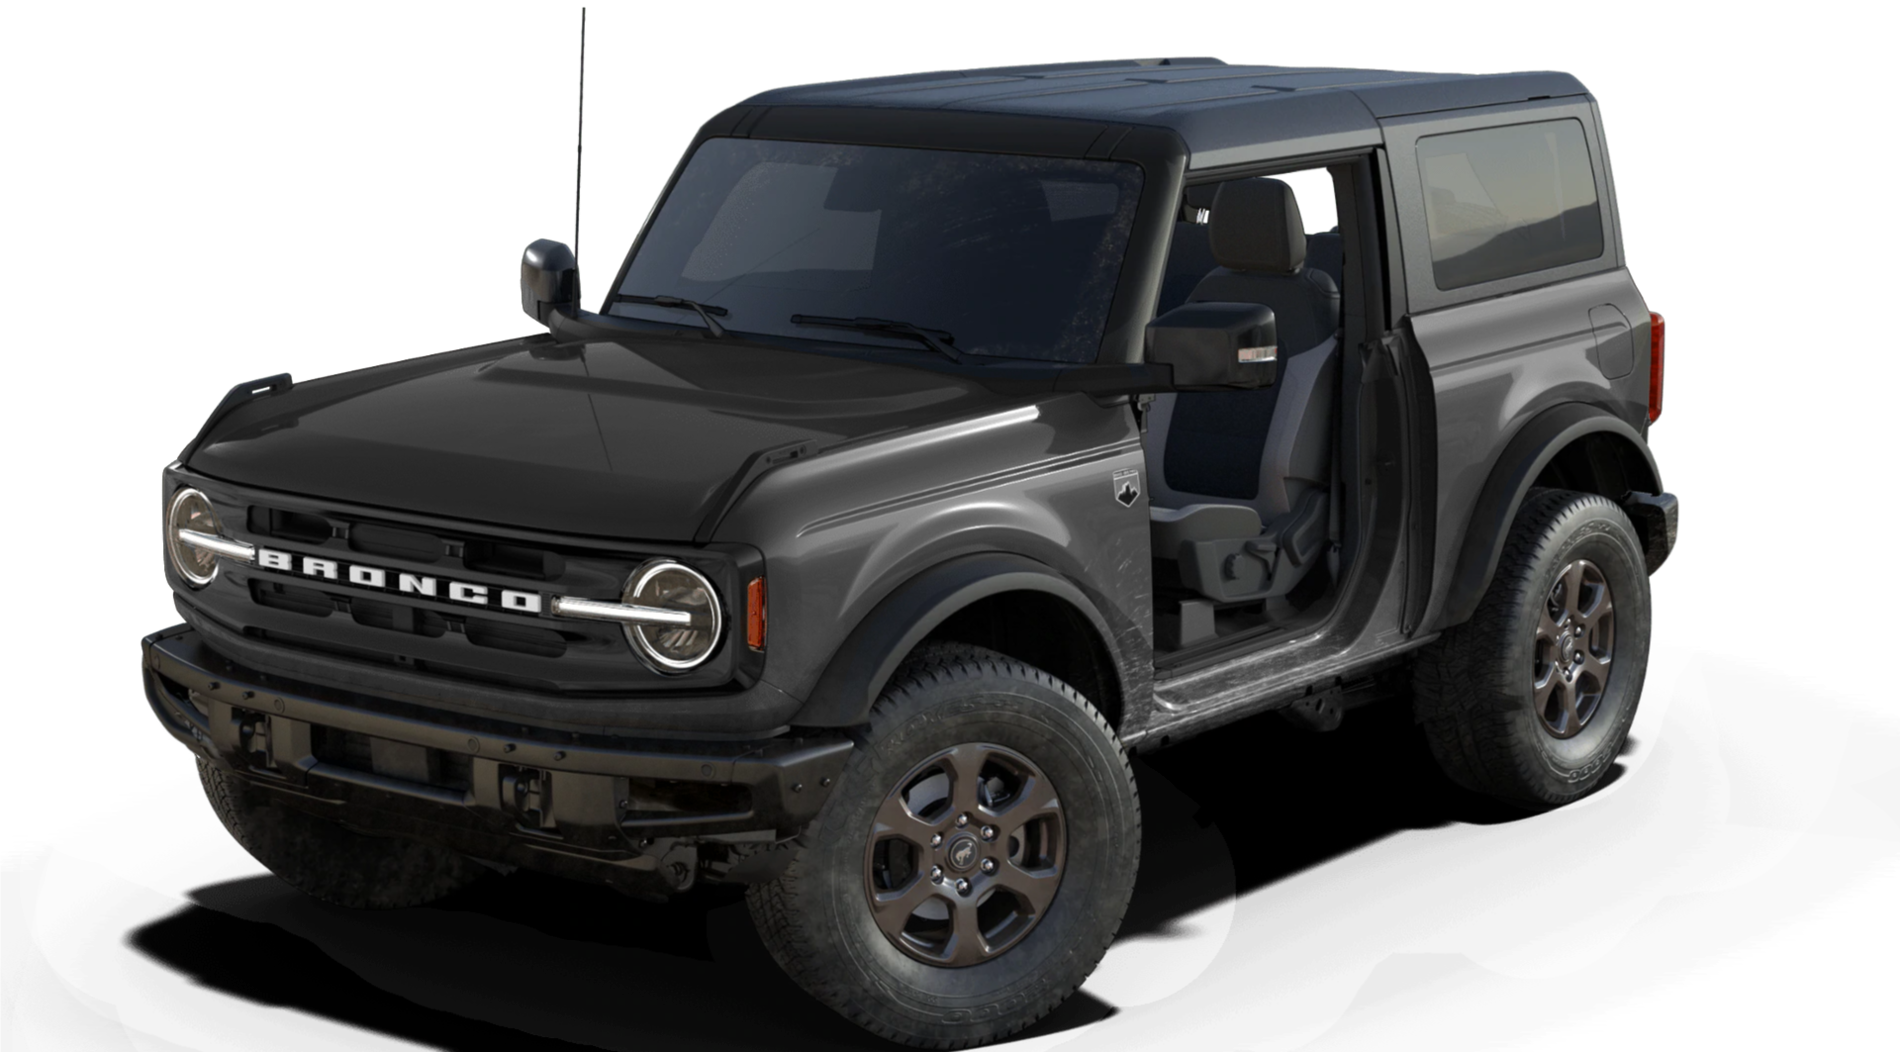 Ford Bronco Carbonized Gray Paint Thread bigbend-modded